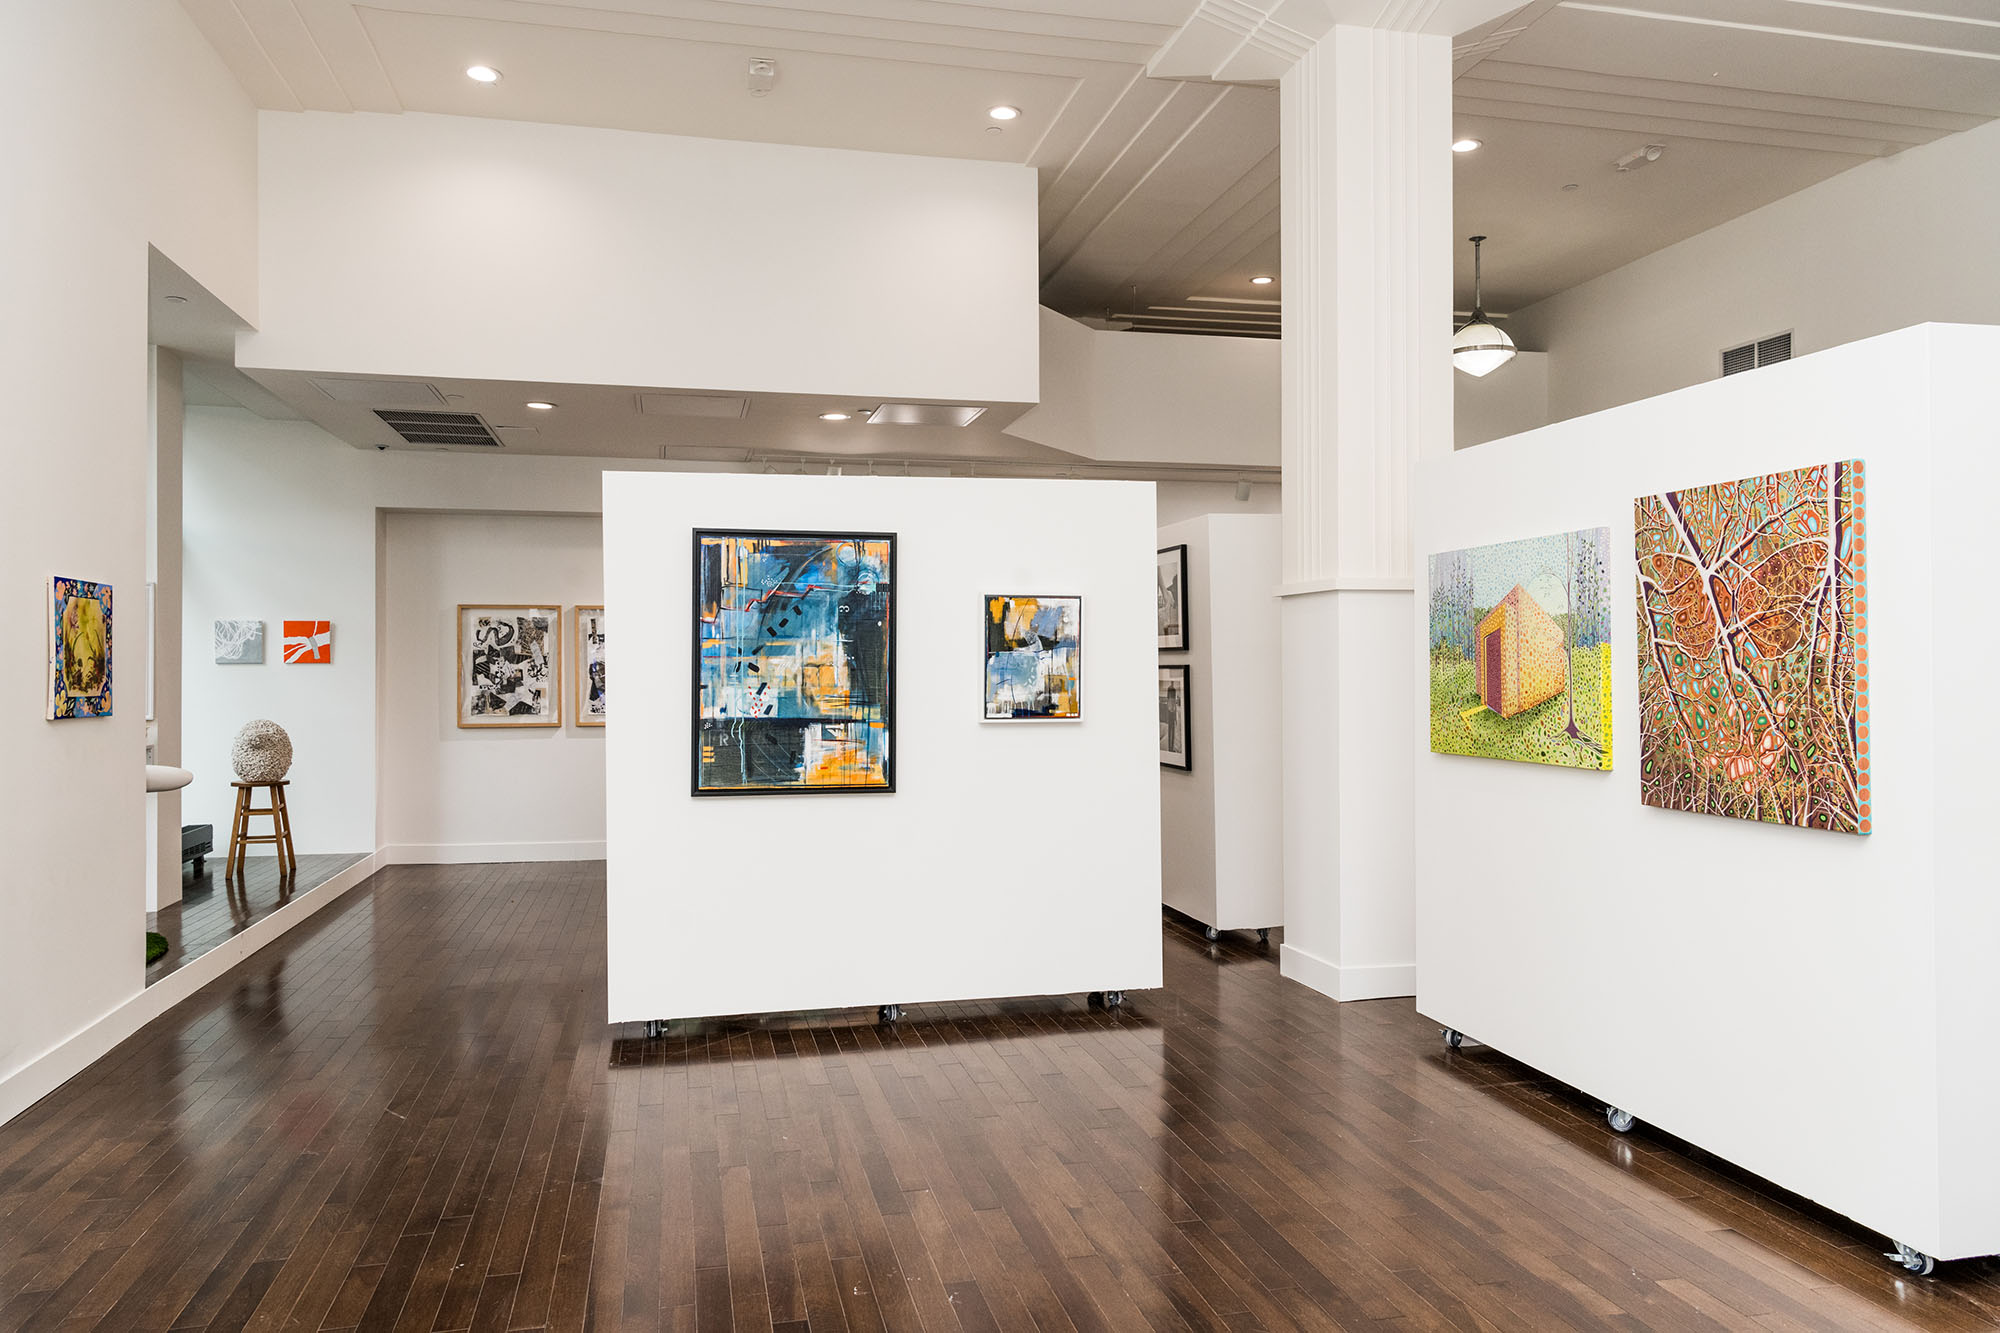 Interior photograph of an exhibition space with paintings and sculptures